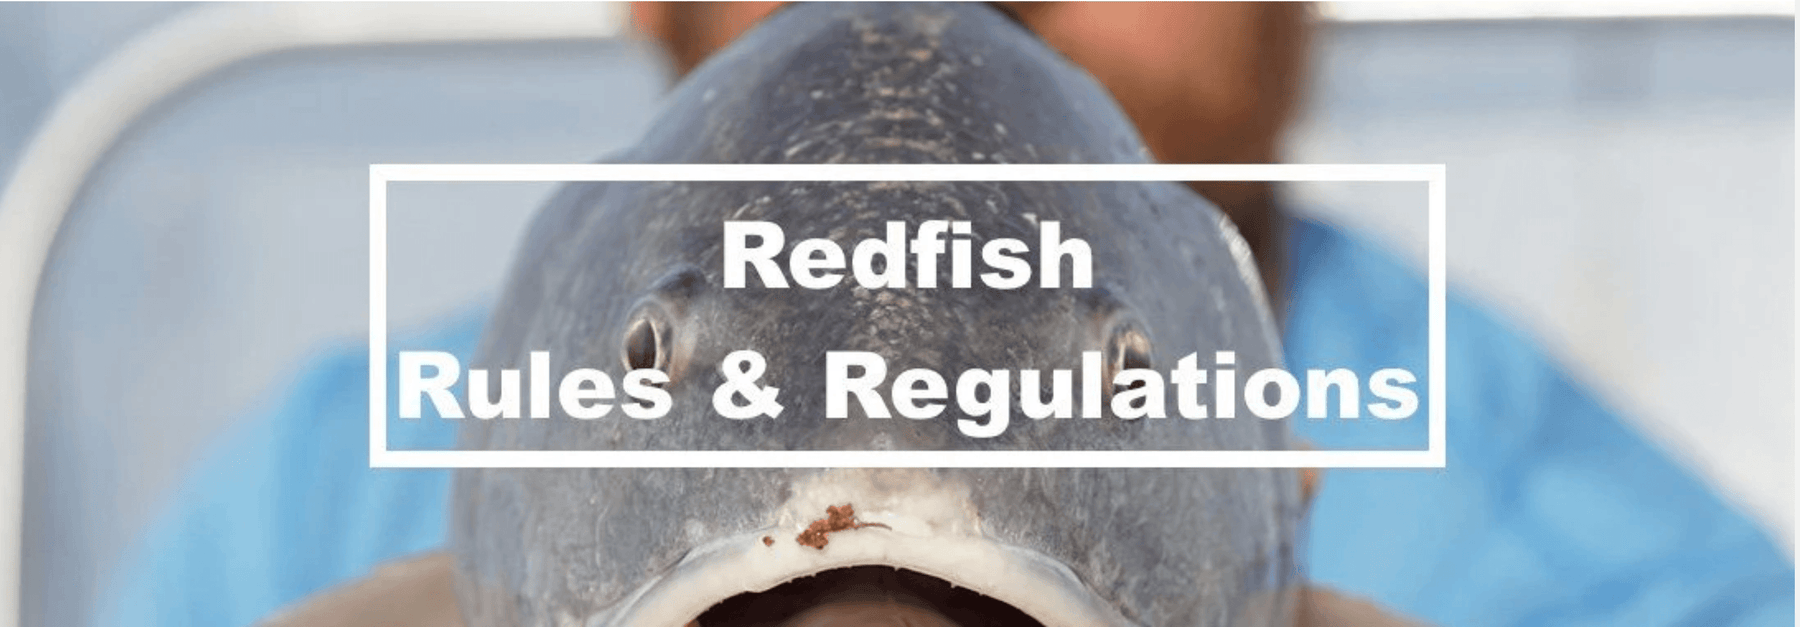 Redfish Regulations and Rules